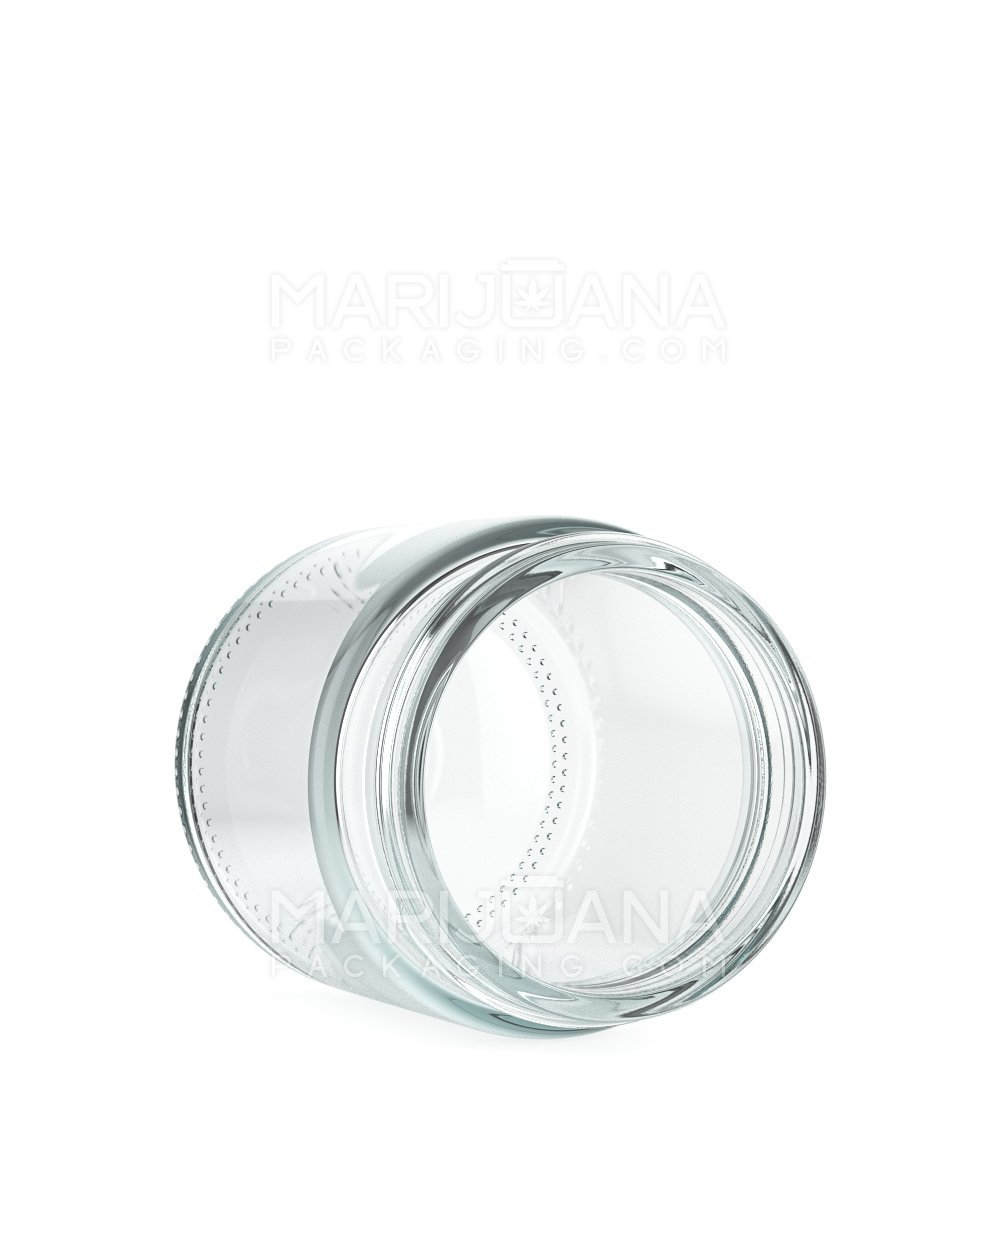 Straight Sided Clear Glass Jars | 53mm - 3oz - 150 Count - 3